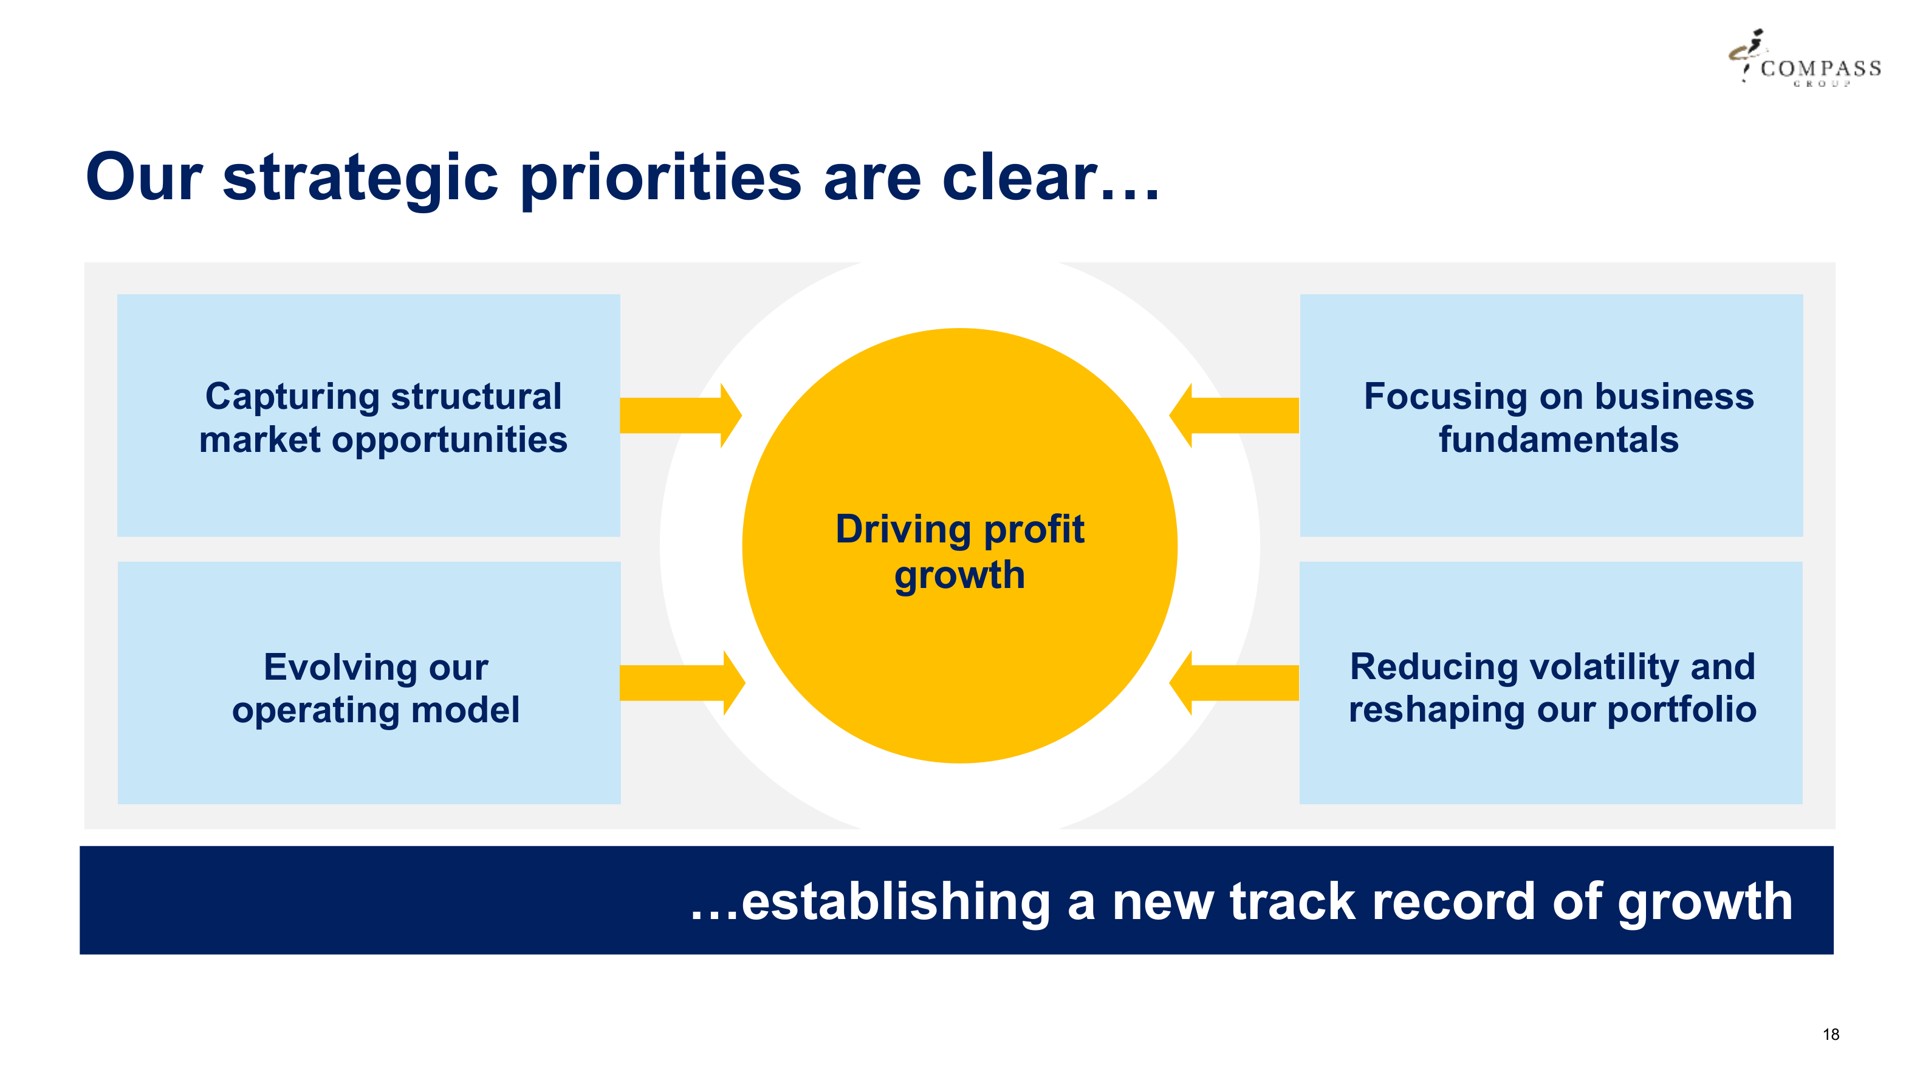 our strategic priorities are clear capturing structural market opportunities focusing on business fundamentals driving profit growth evolving operating model reducing volatility and reshaping portfolio establishing a new track record of growth | Compass Group